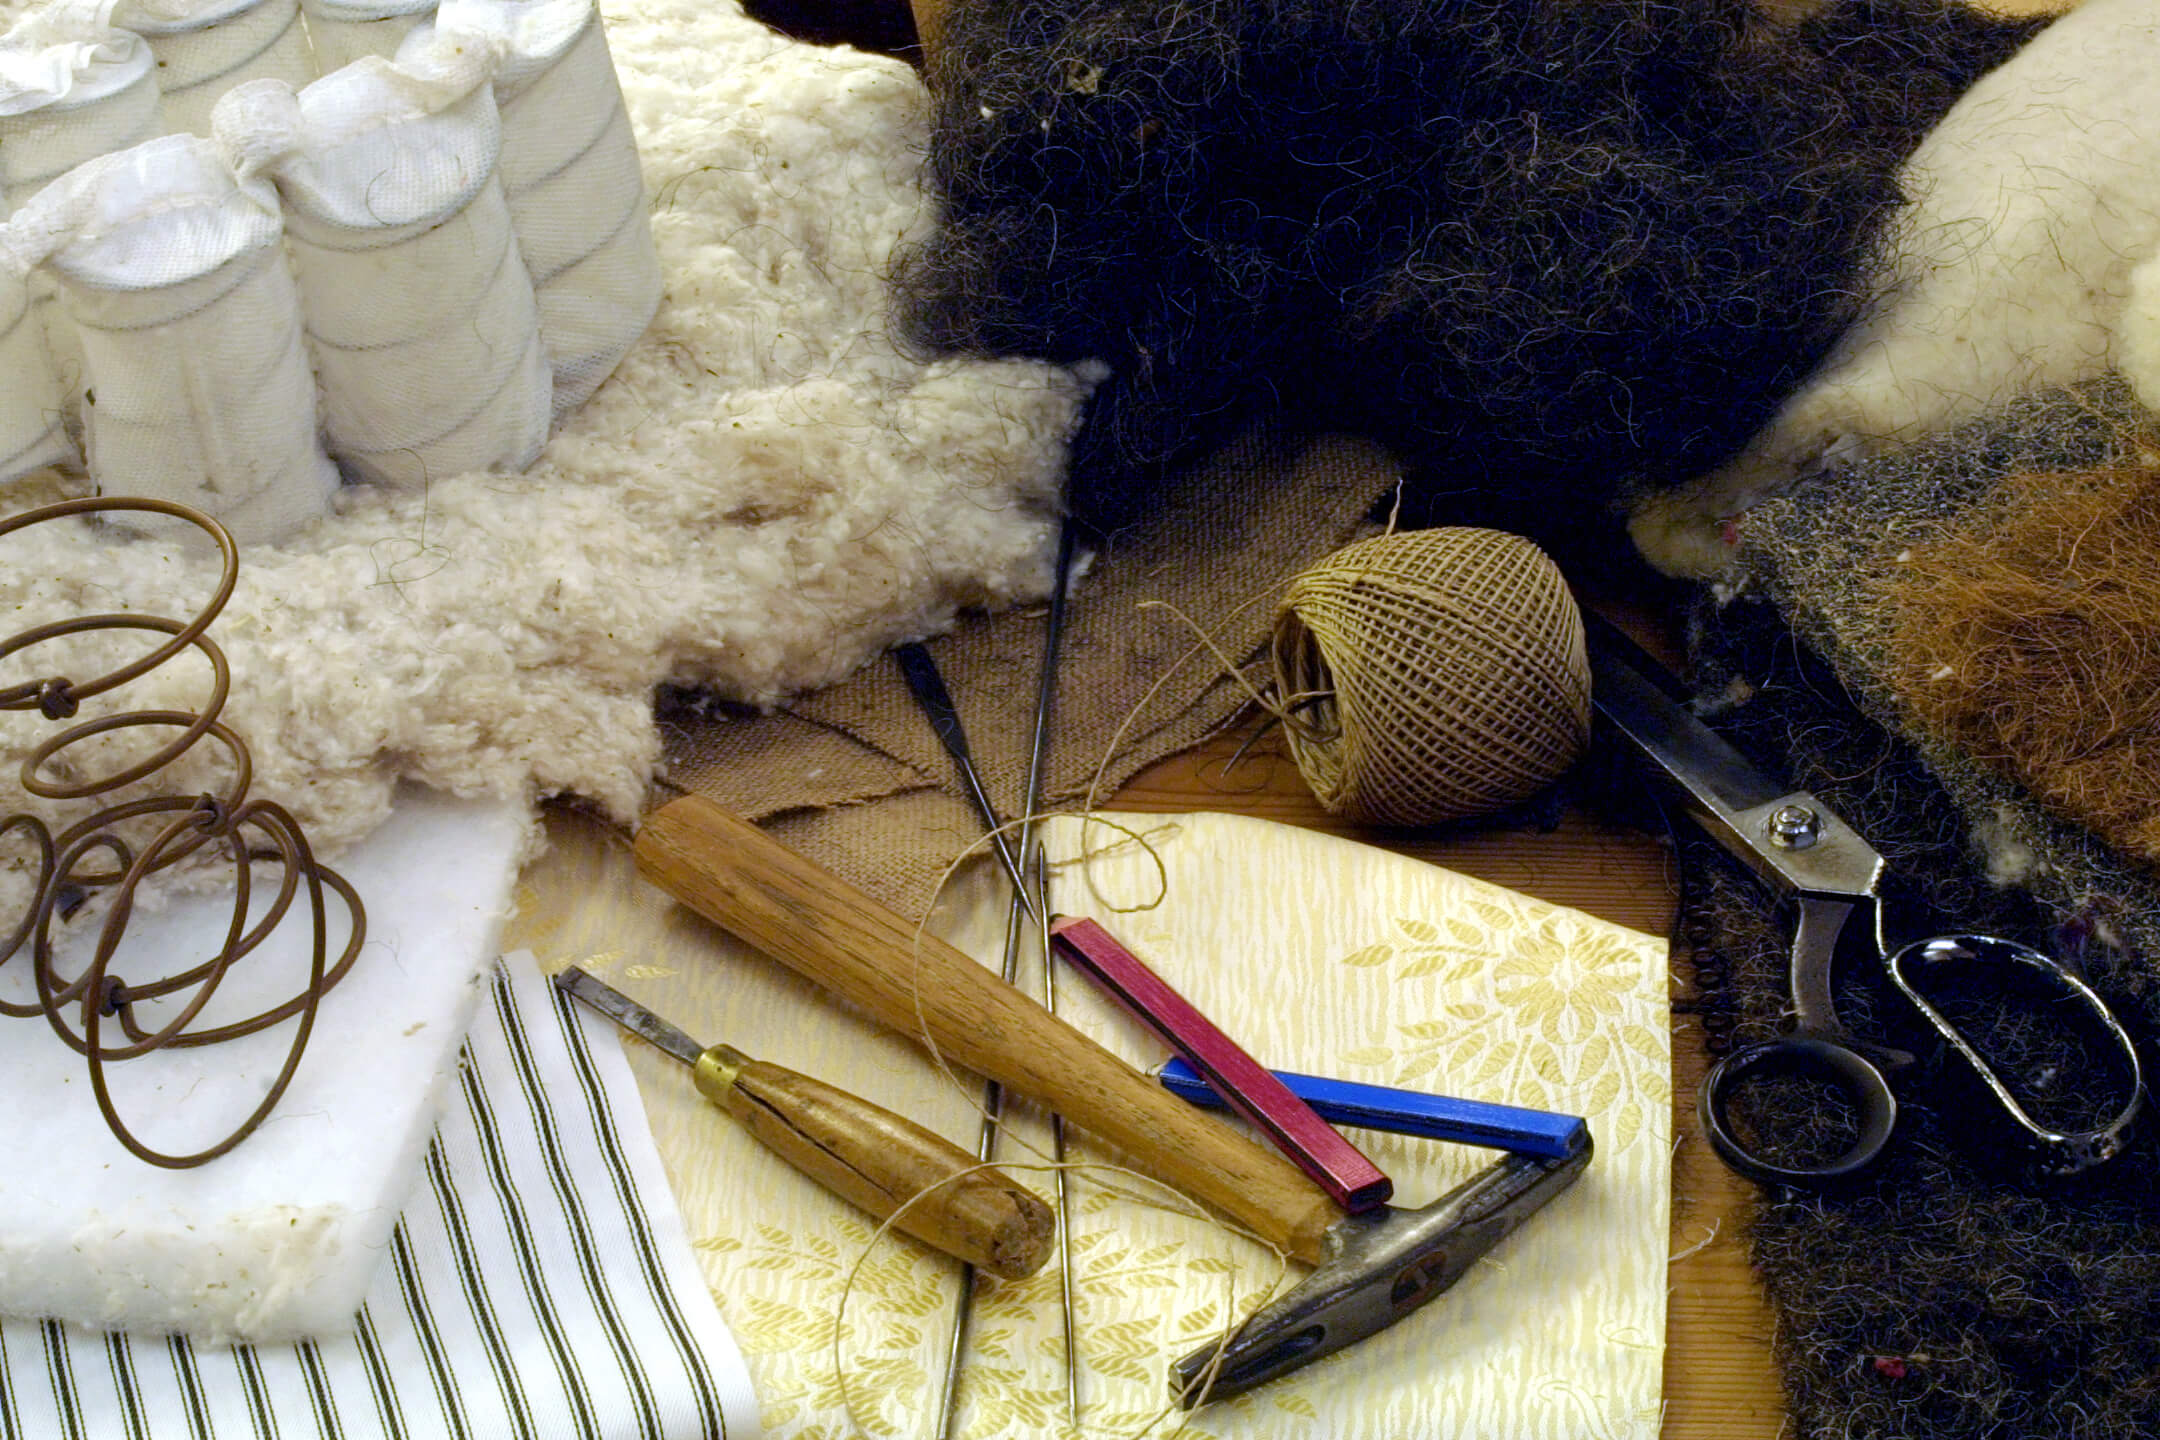 Upholstery materials and tools